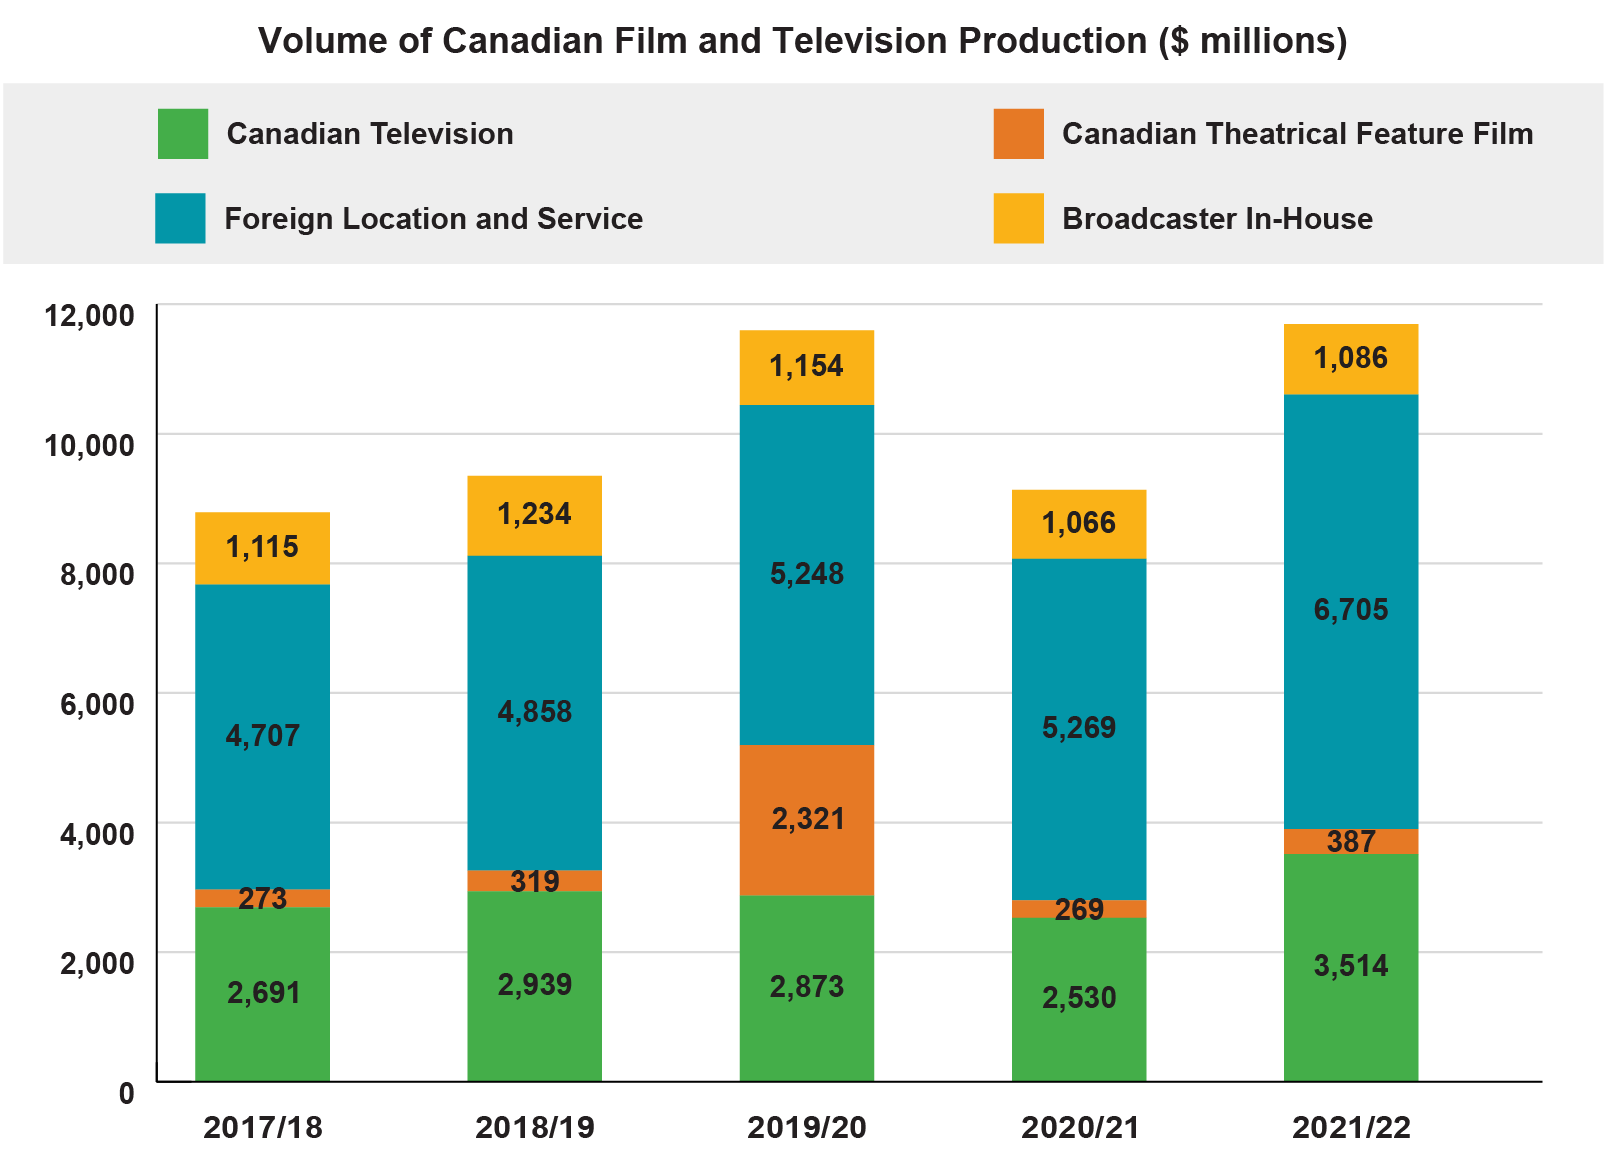 A stacked bar chart showing volume of Canadian film and television production in millions of dollars spanning from the 2017/18 fiscal year to the 2021/22 year. The chart gives data for Canadian television, Canadian theatrical feature film, foreign location and service (FLS), and broadcaster in-house.